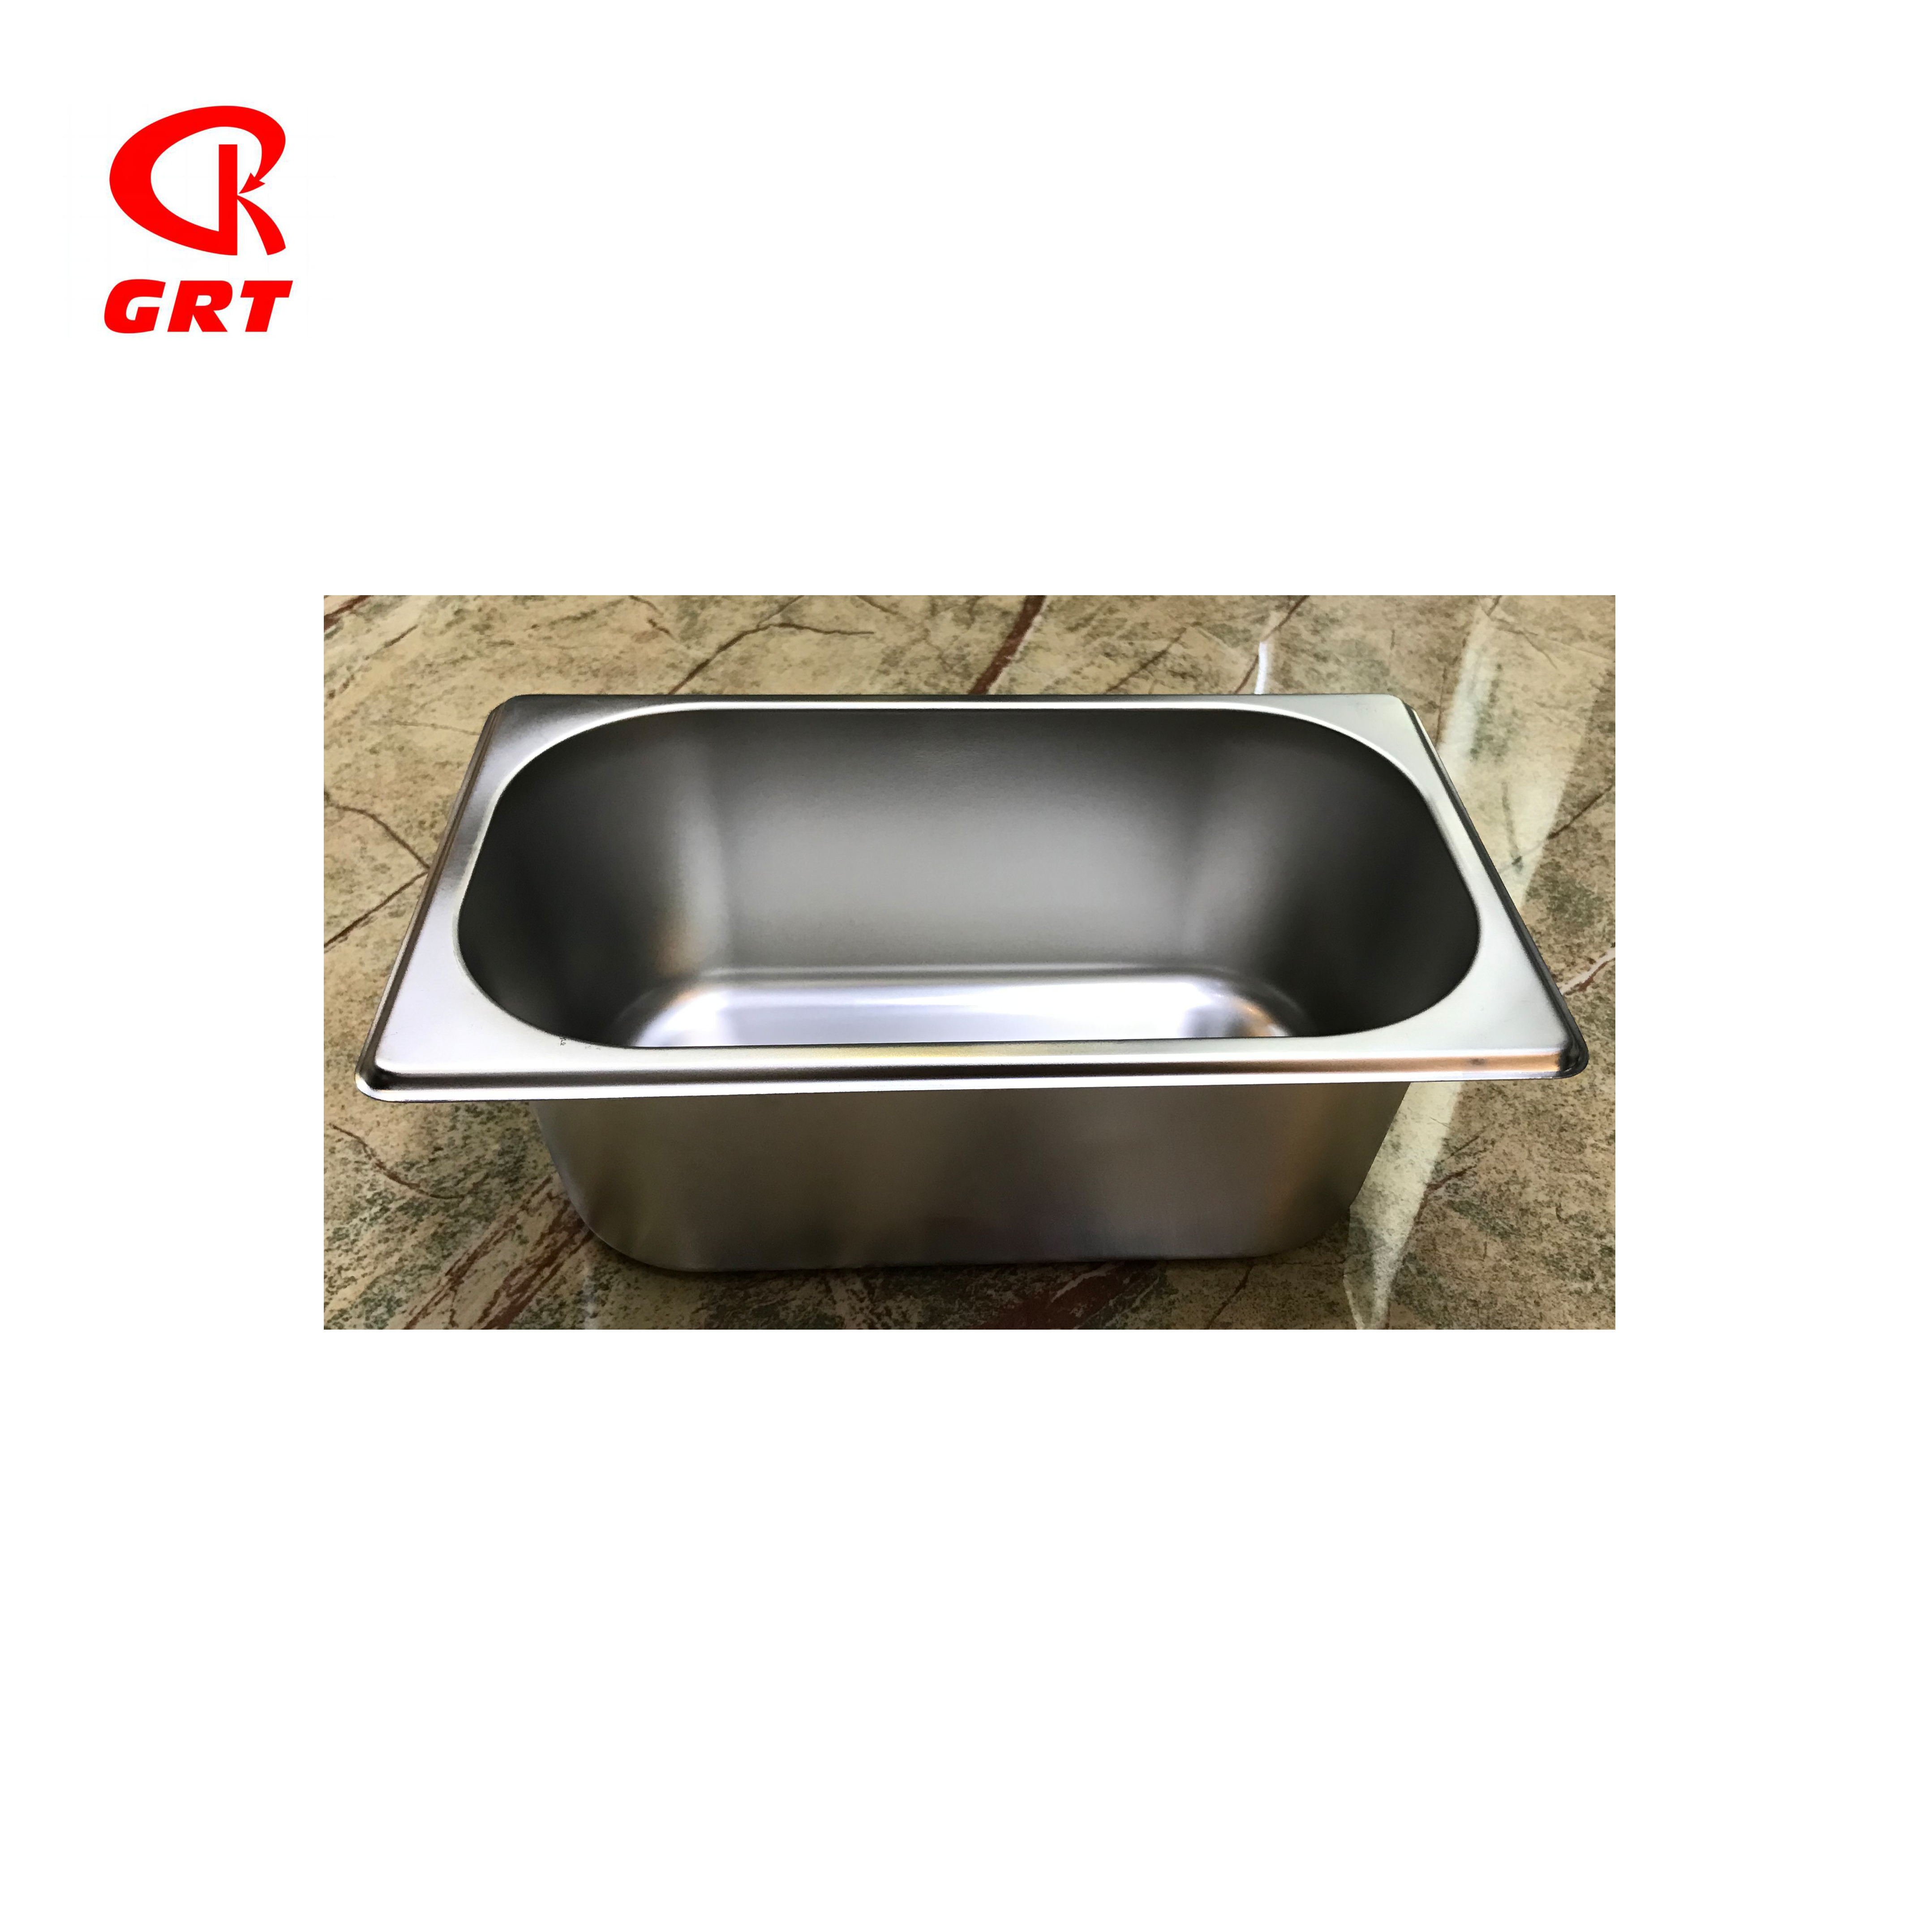 1/4 Stainless Steel American Food Pan Gastronorm Containers All Size available GN Pan 